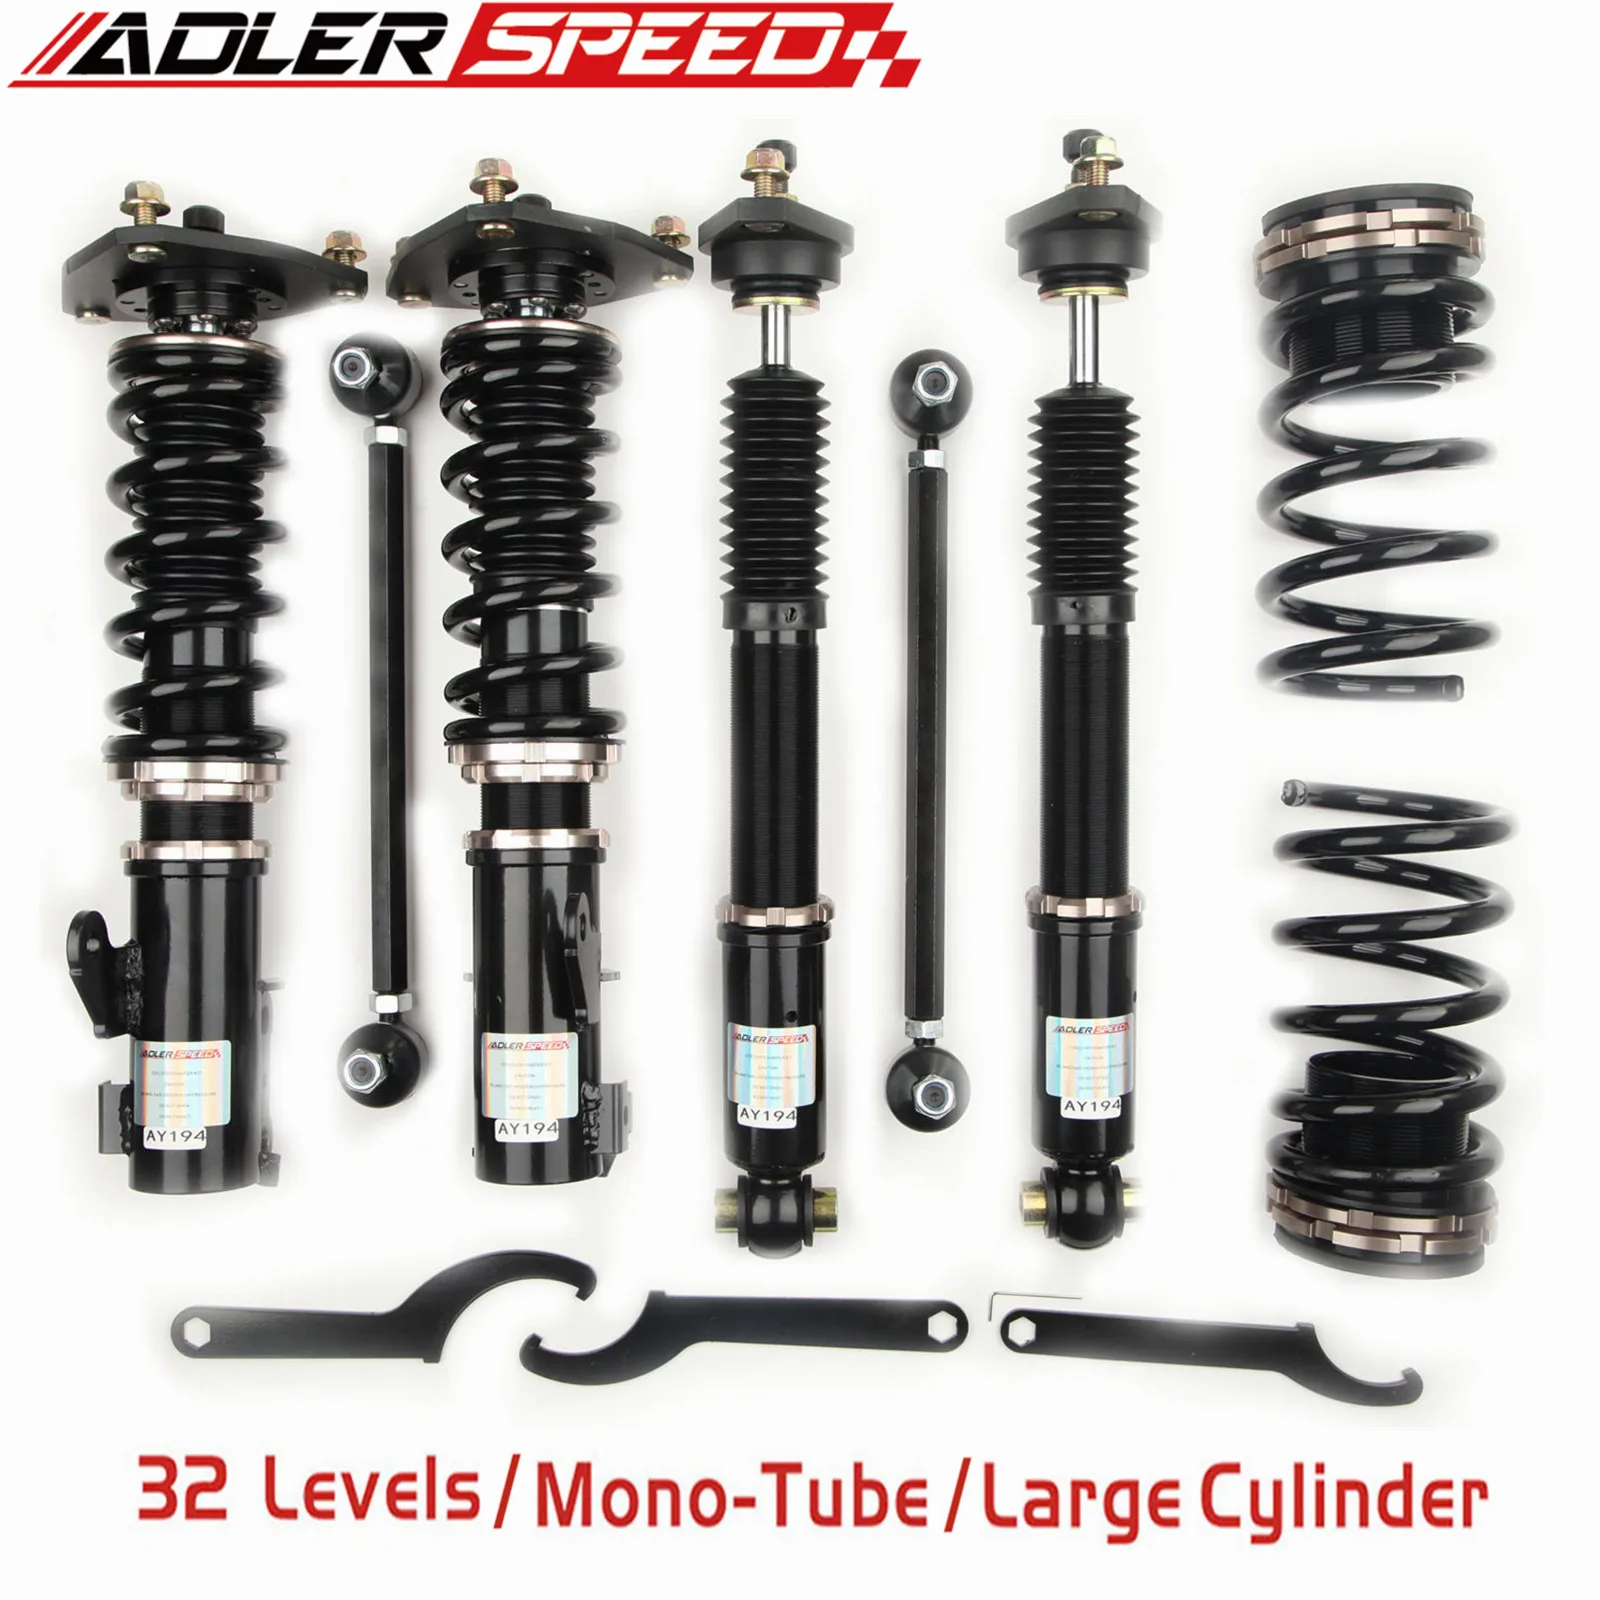 

ADLERSPEED 32 Ways Coilovers Lowering Suspension Kit For Hyundai Genesis Coupe 2011-2016